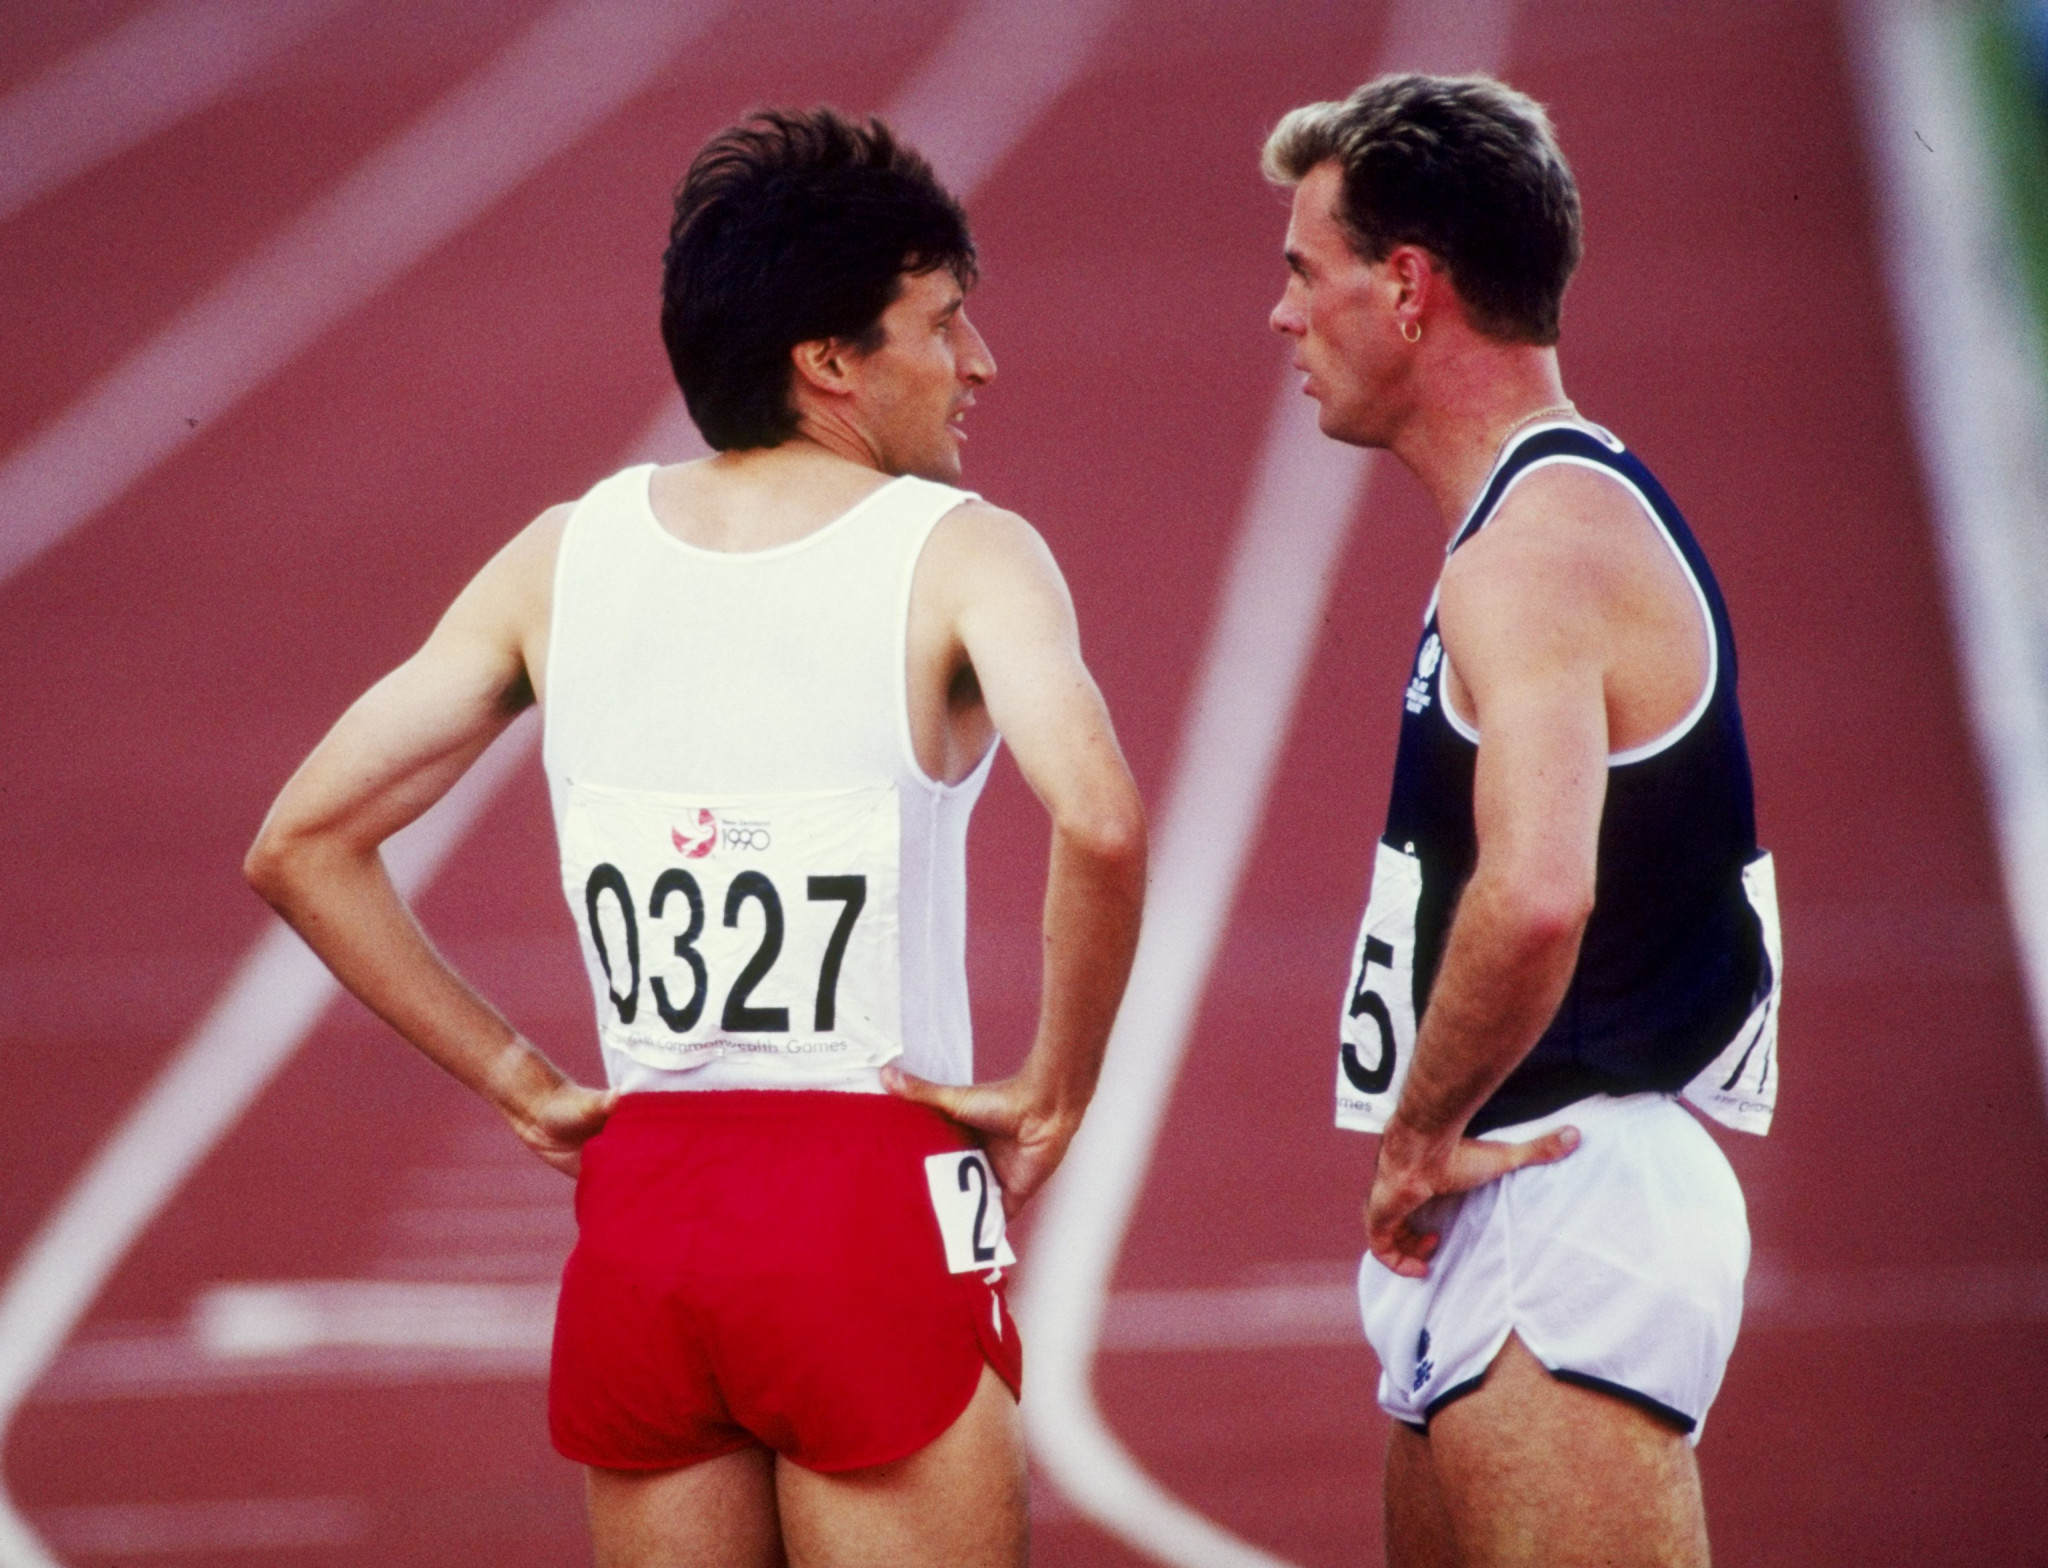 Sebastian Coe's only appearance at the Commonwealth Games came at Auckland 1990 ©Getty Images